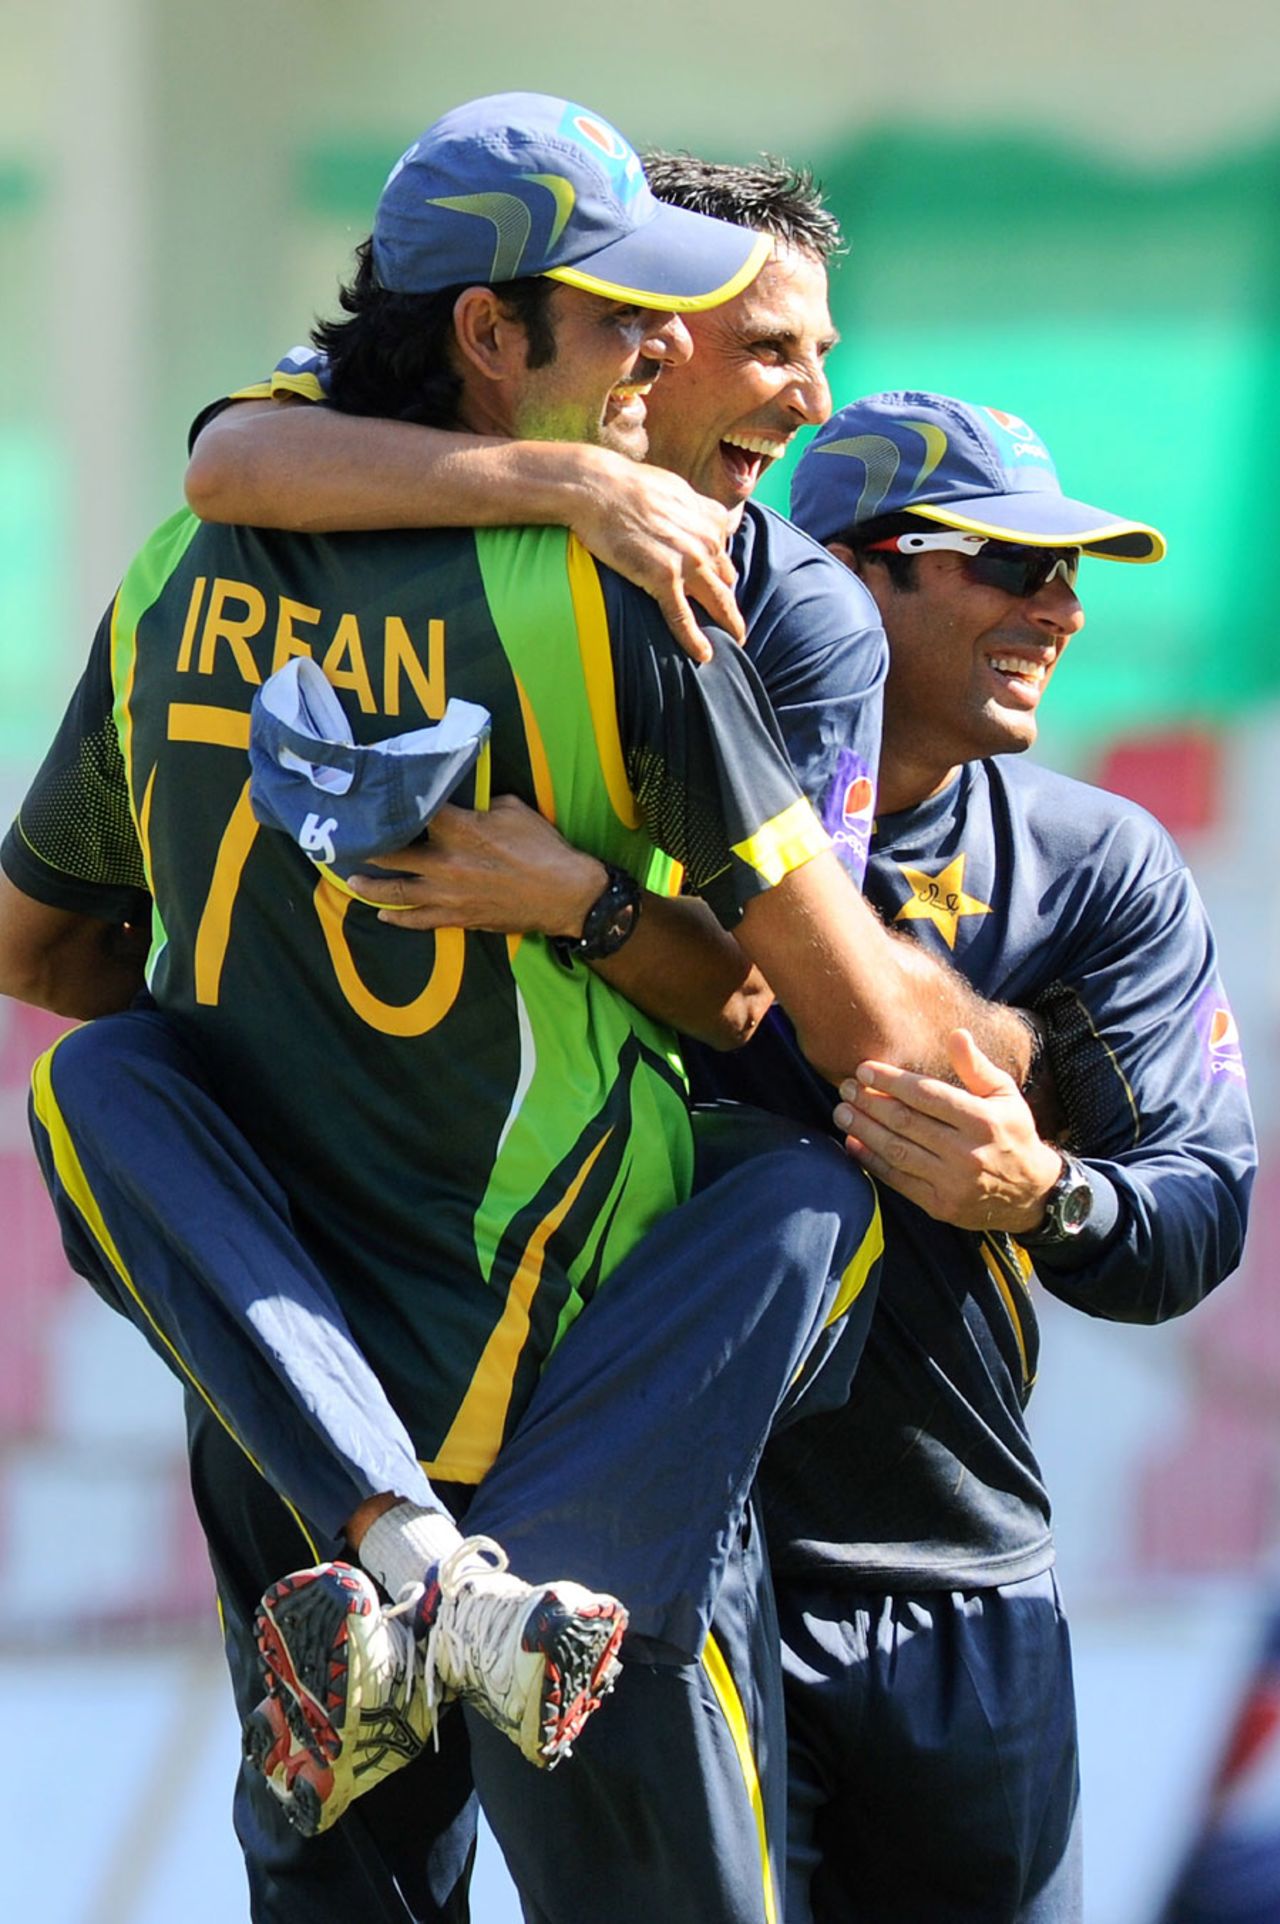 Younis Khan gets a lift from Mohammad Irfan, Sharjah, January 15, 2014